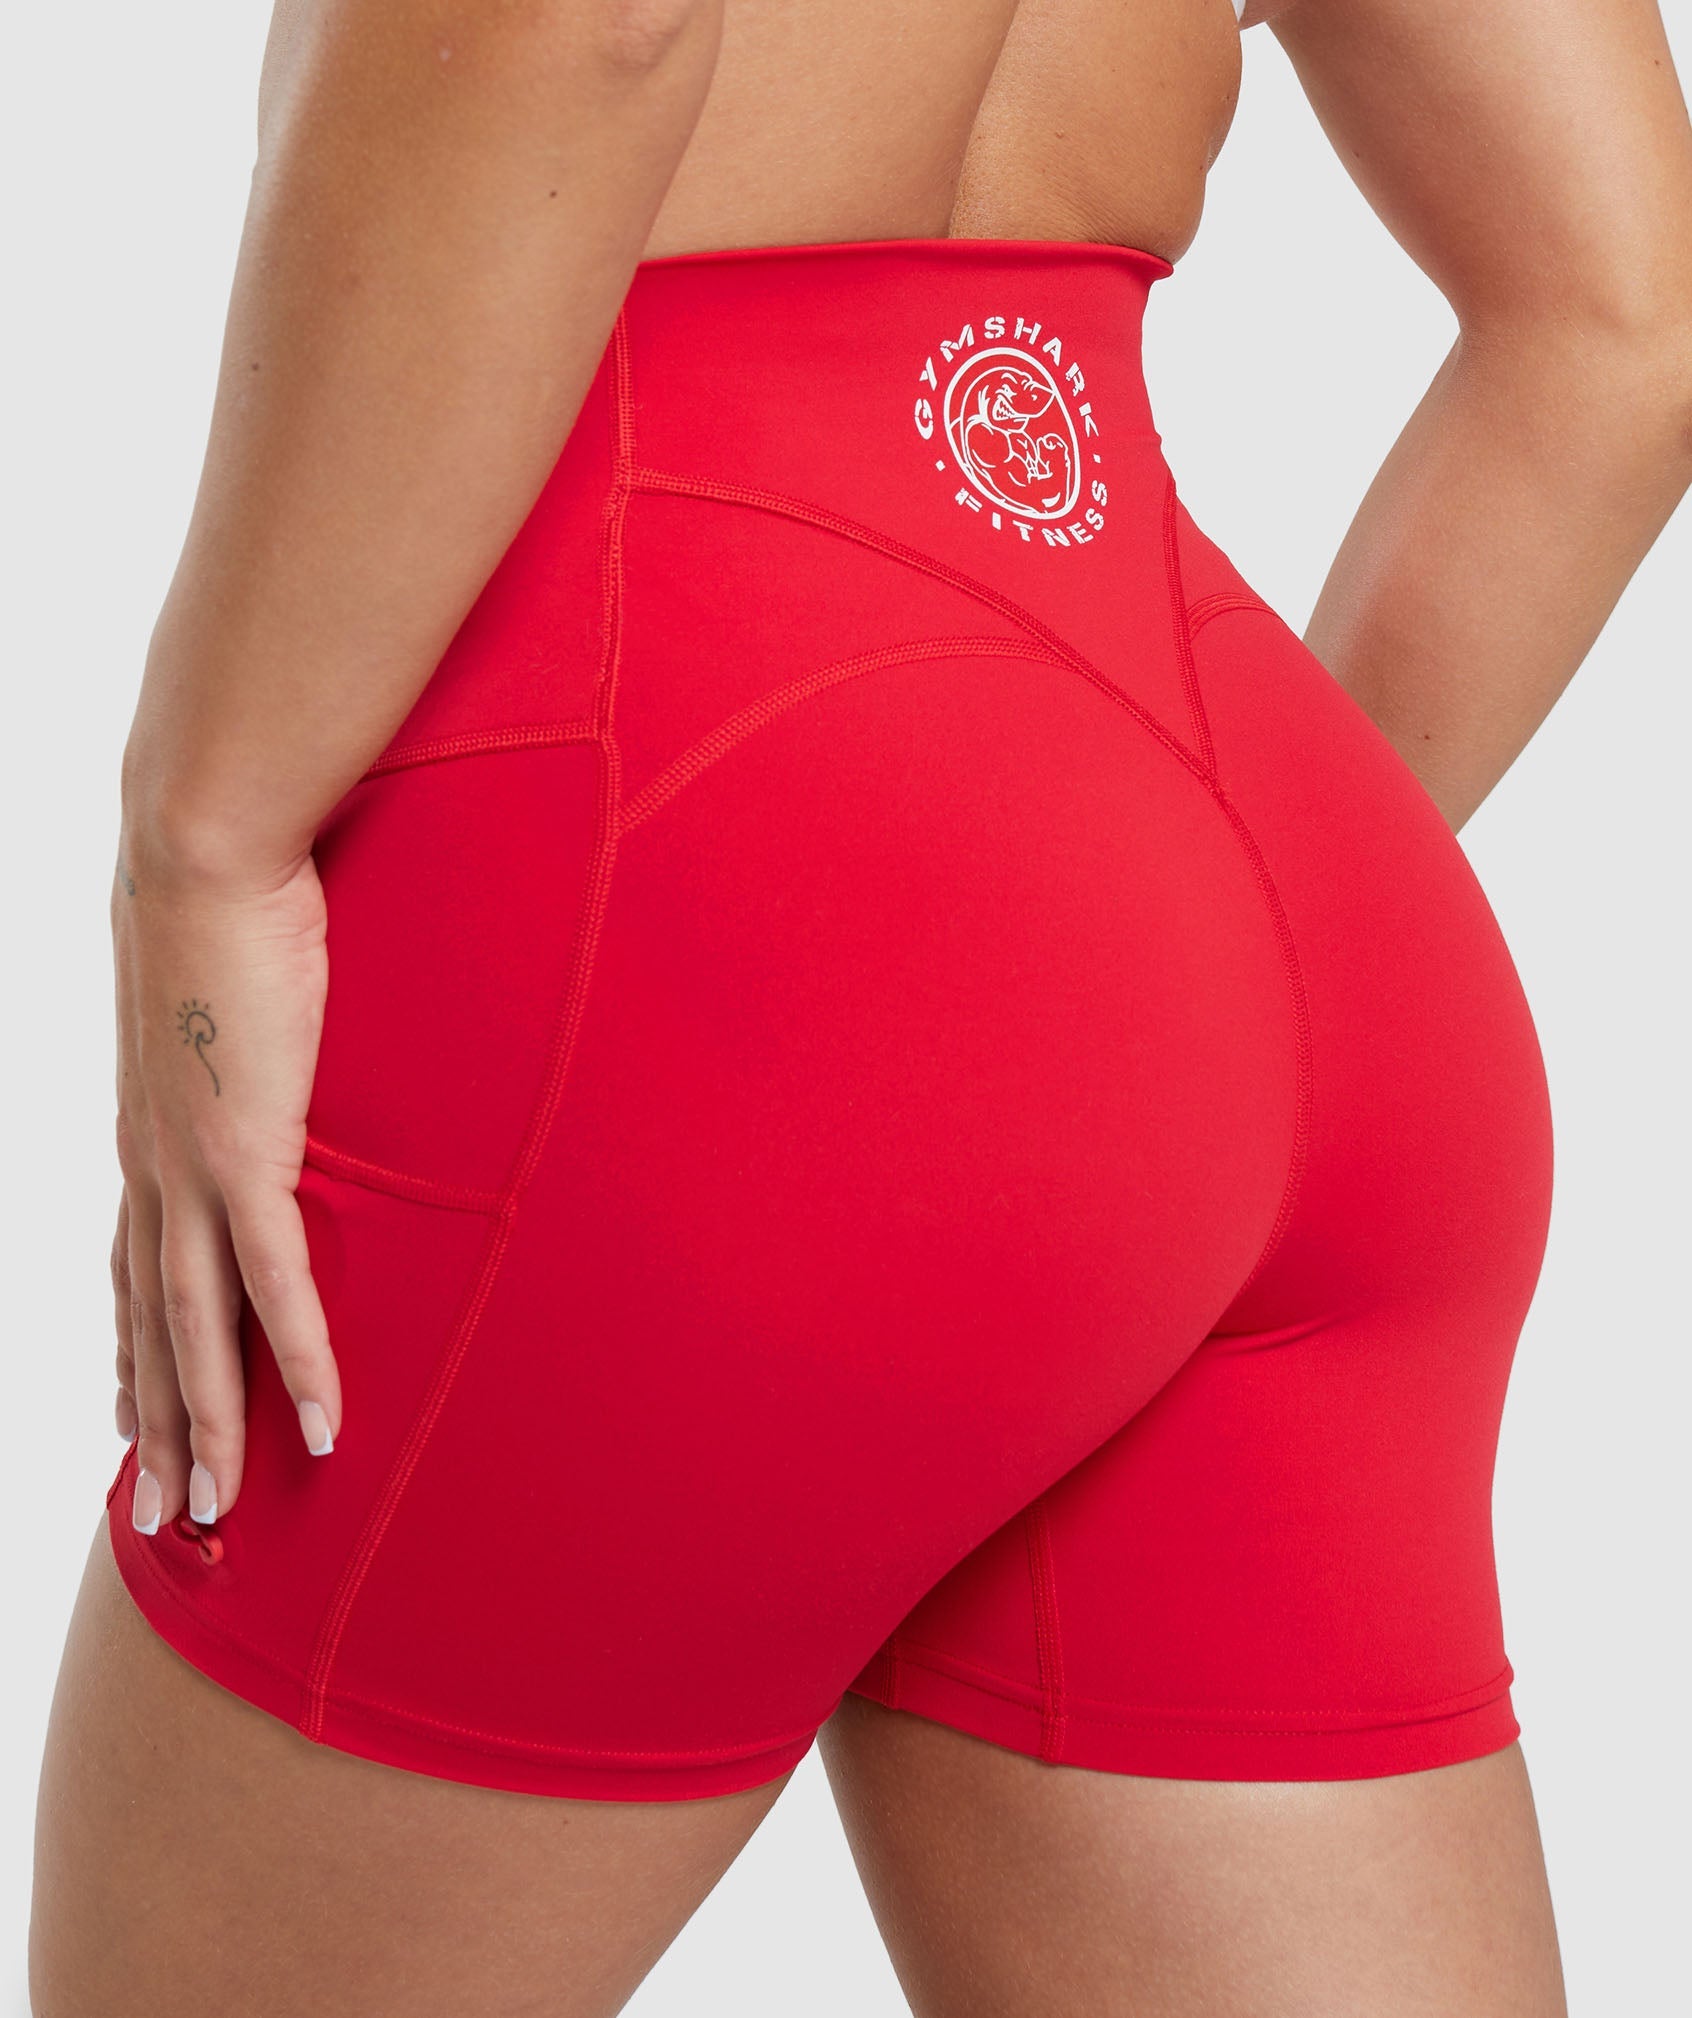 Legacy Tight Shorts in Jamz Red - view 6